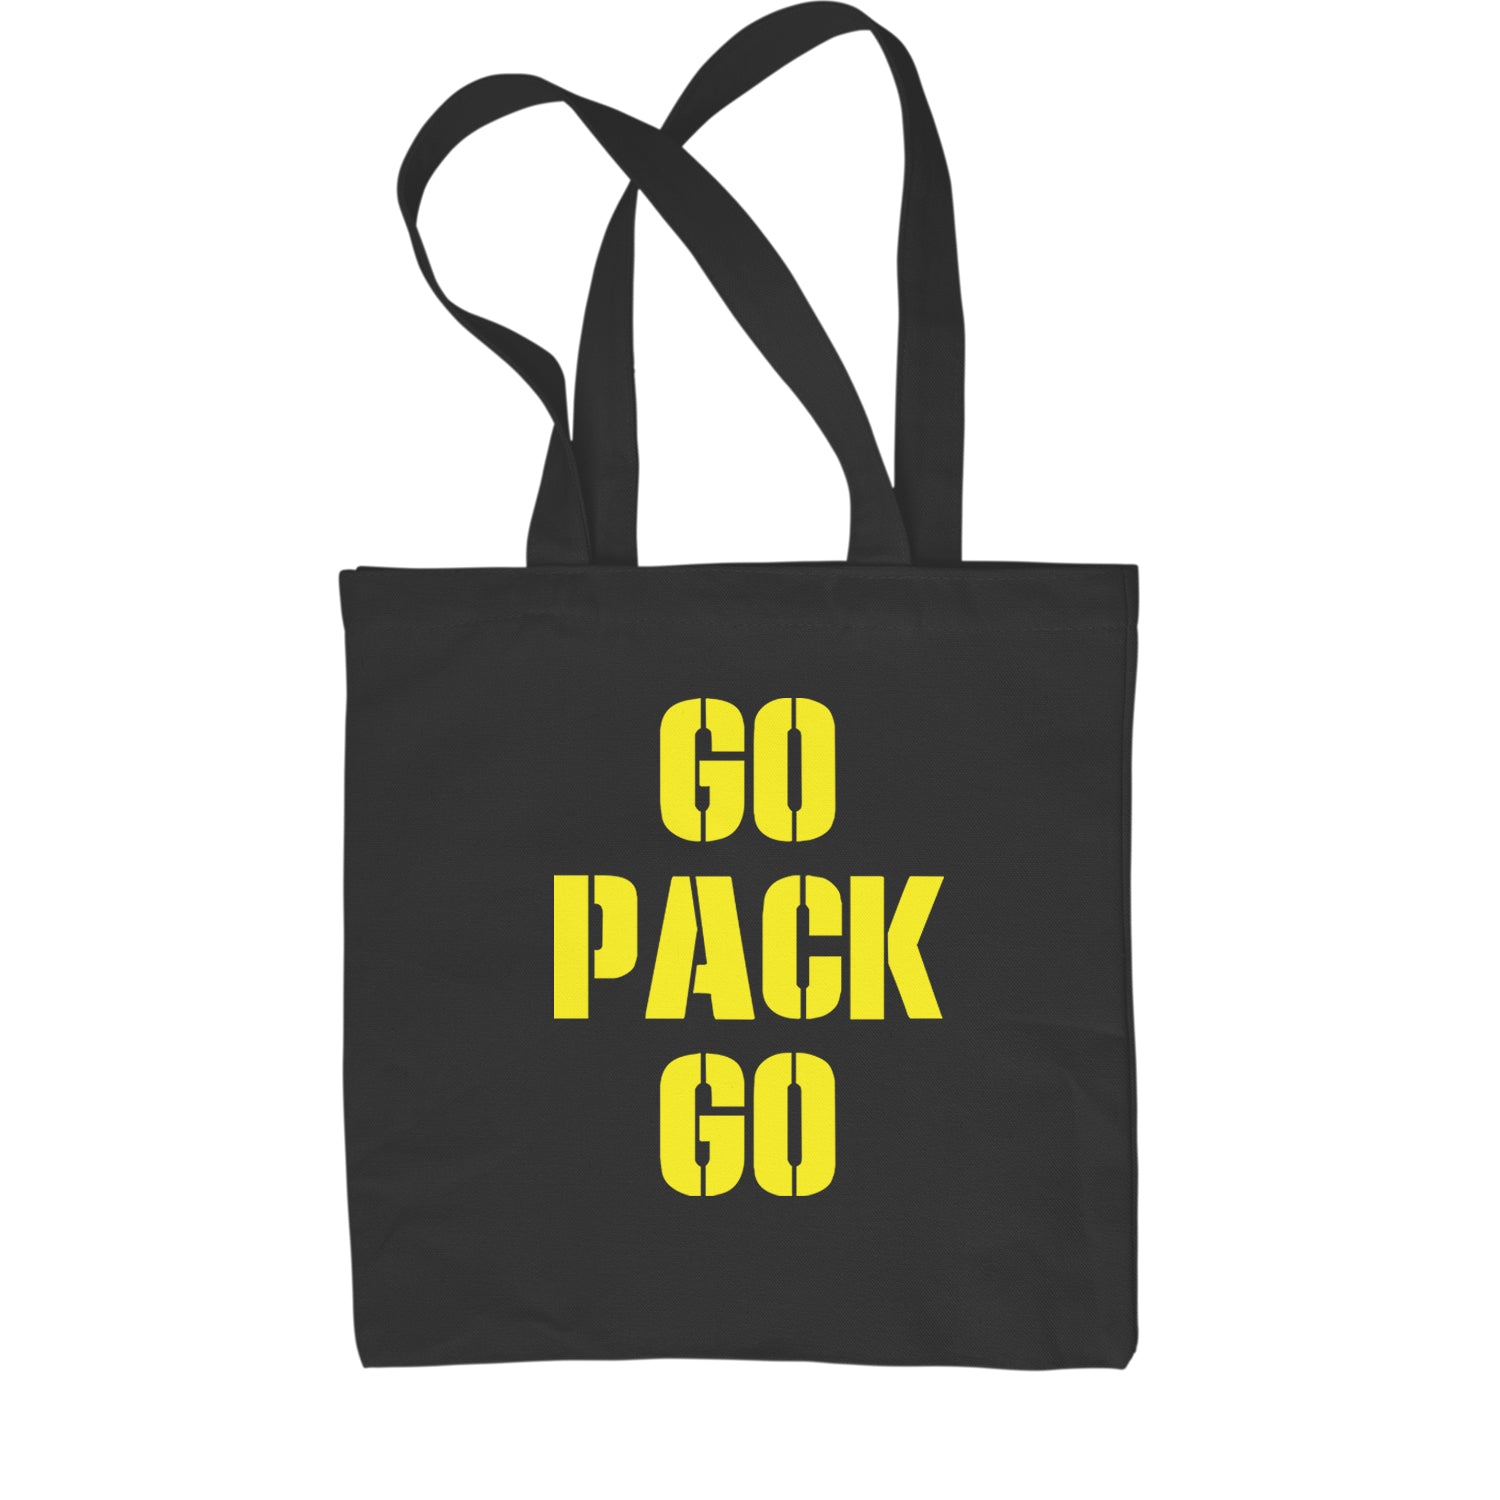 Go Pack Go Green Bay Shopping Tote Bag football, greenbay, packer by Expression Tees